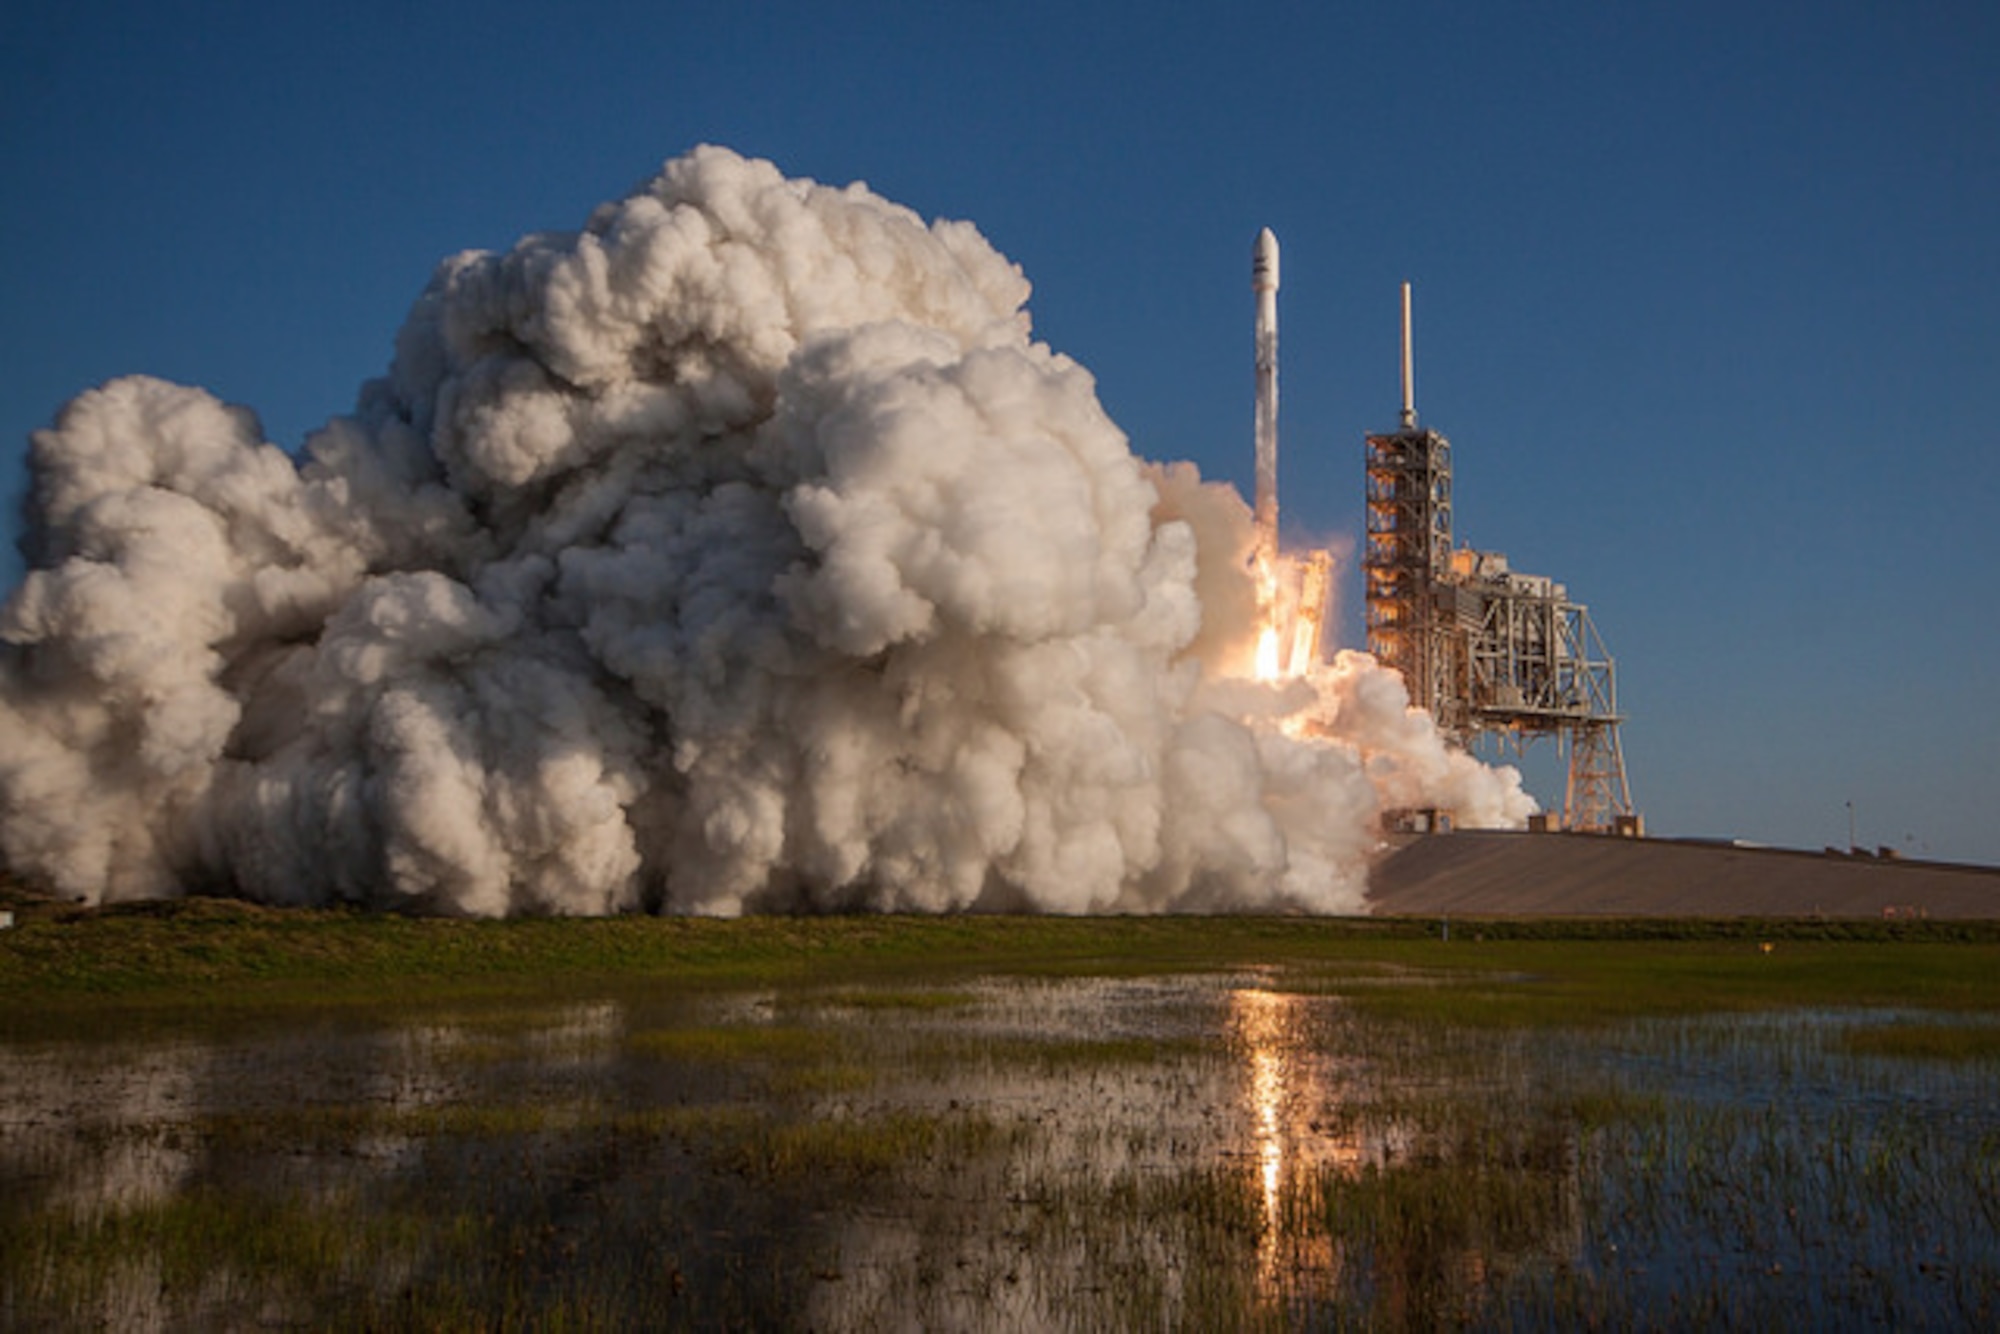 SpaceX made history March 30, 2017 with the successful launch of a reused Falcon 9 rocket from Launch Complex 39A (LC-39A) at NASA’s Kennedy Space Center in Florida at 6:27 p.m. EDT. One hour prior to the milestone launch, Citizen Airmen from the 920th Rescue Wing were clearing the box beneath the rocket’s path in an HH-60G Pave Hawk helicopter ensuring no mariners were in harm’s way prior to launch. (Photo courtesy Spacex)